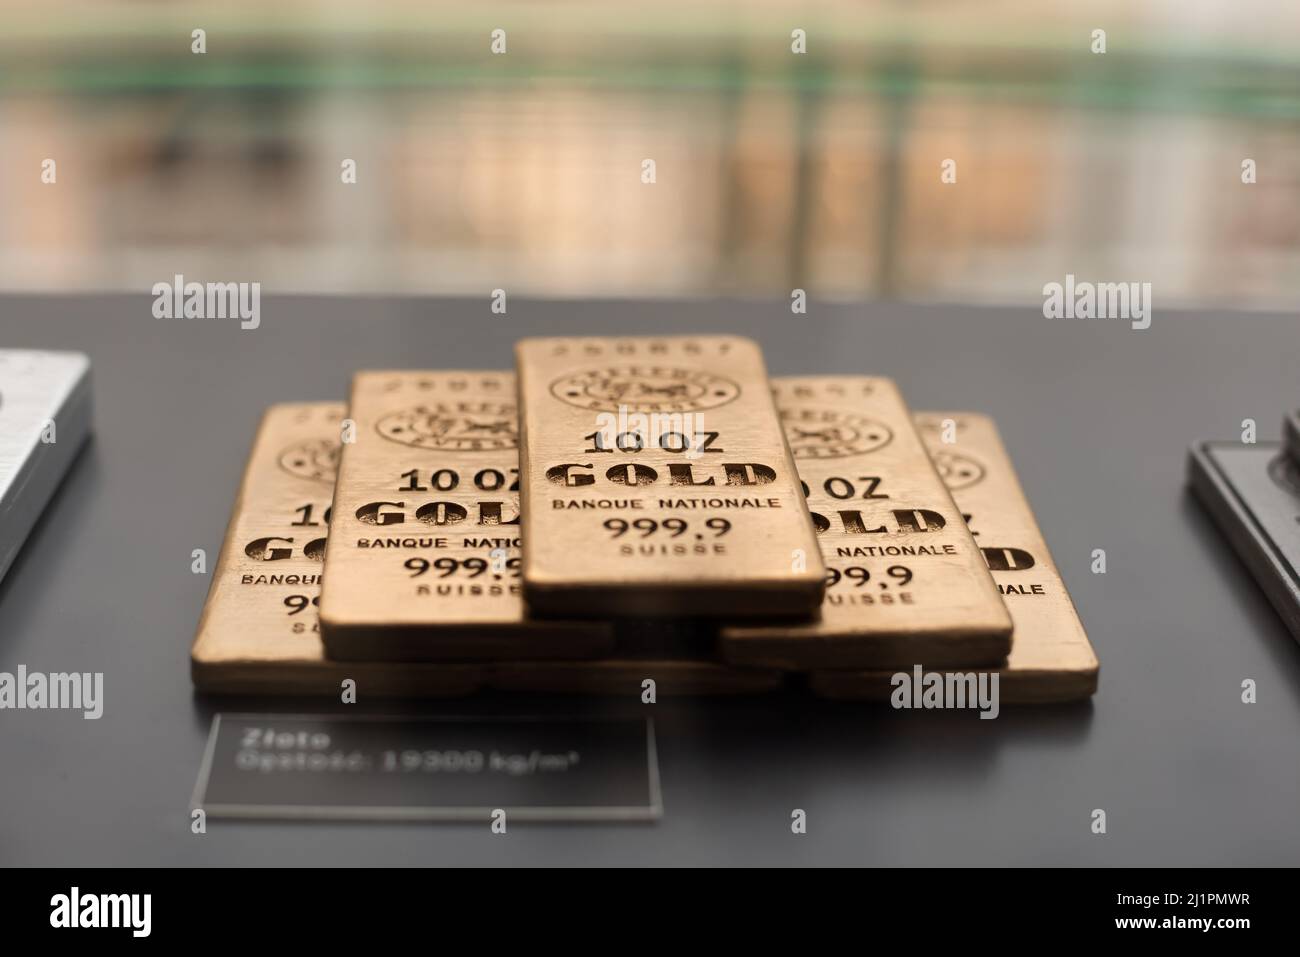 Stack of gold bar 999.9 Stock Photo